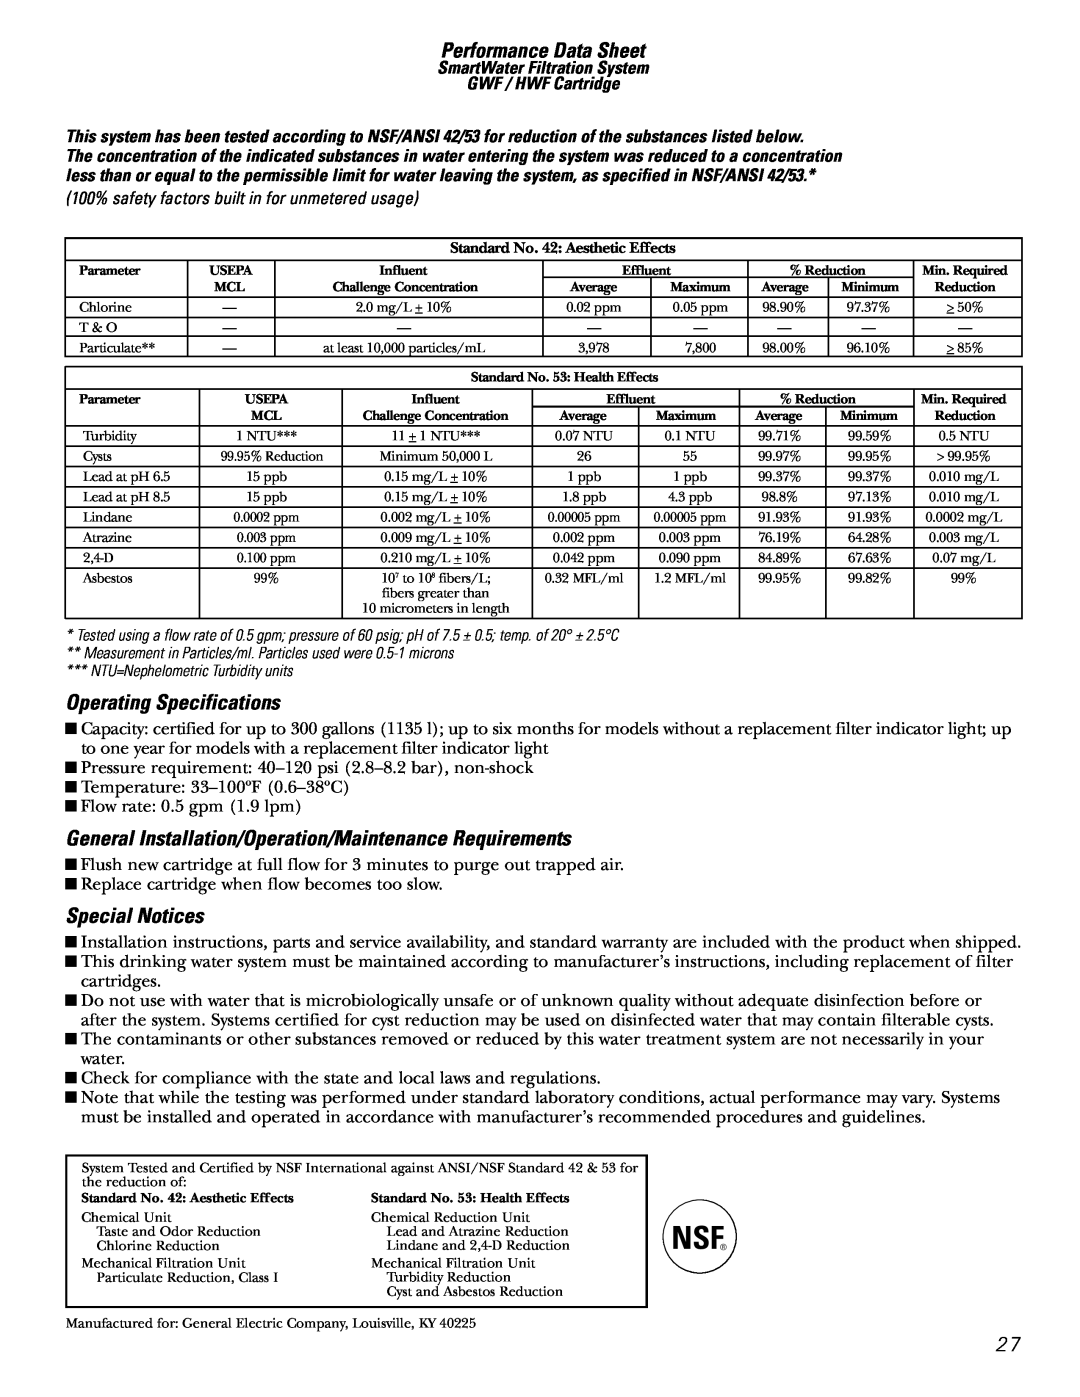 GE 25 Performance Data Sheet, Operating Specifications, Special Notices, 100% safety factors built in for unmetered usage 